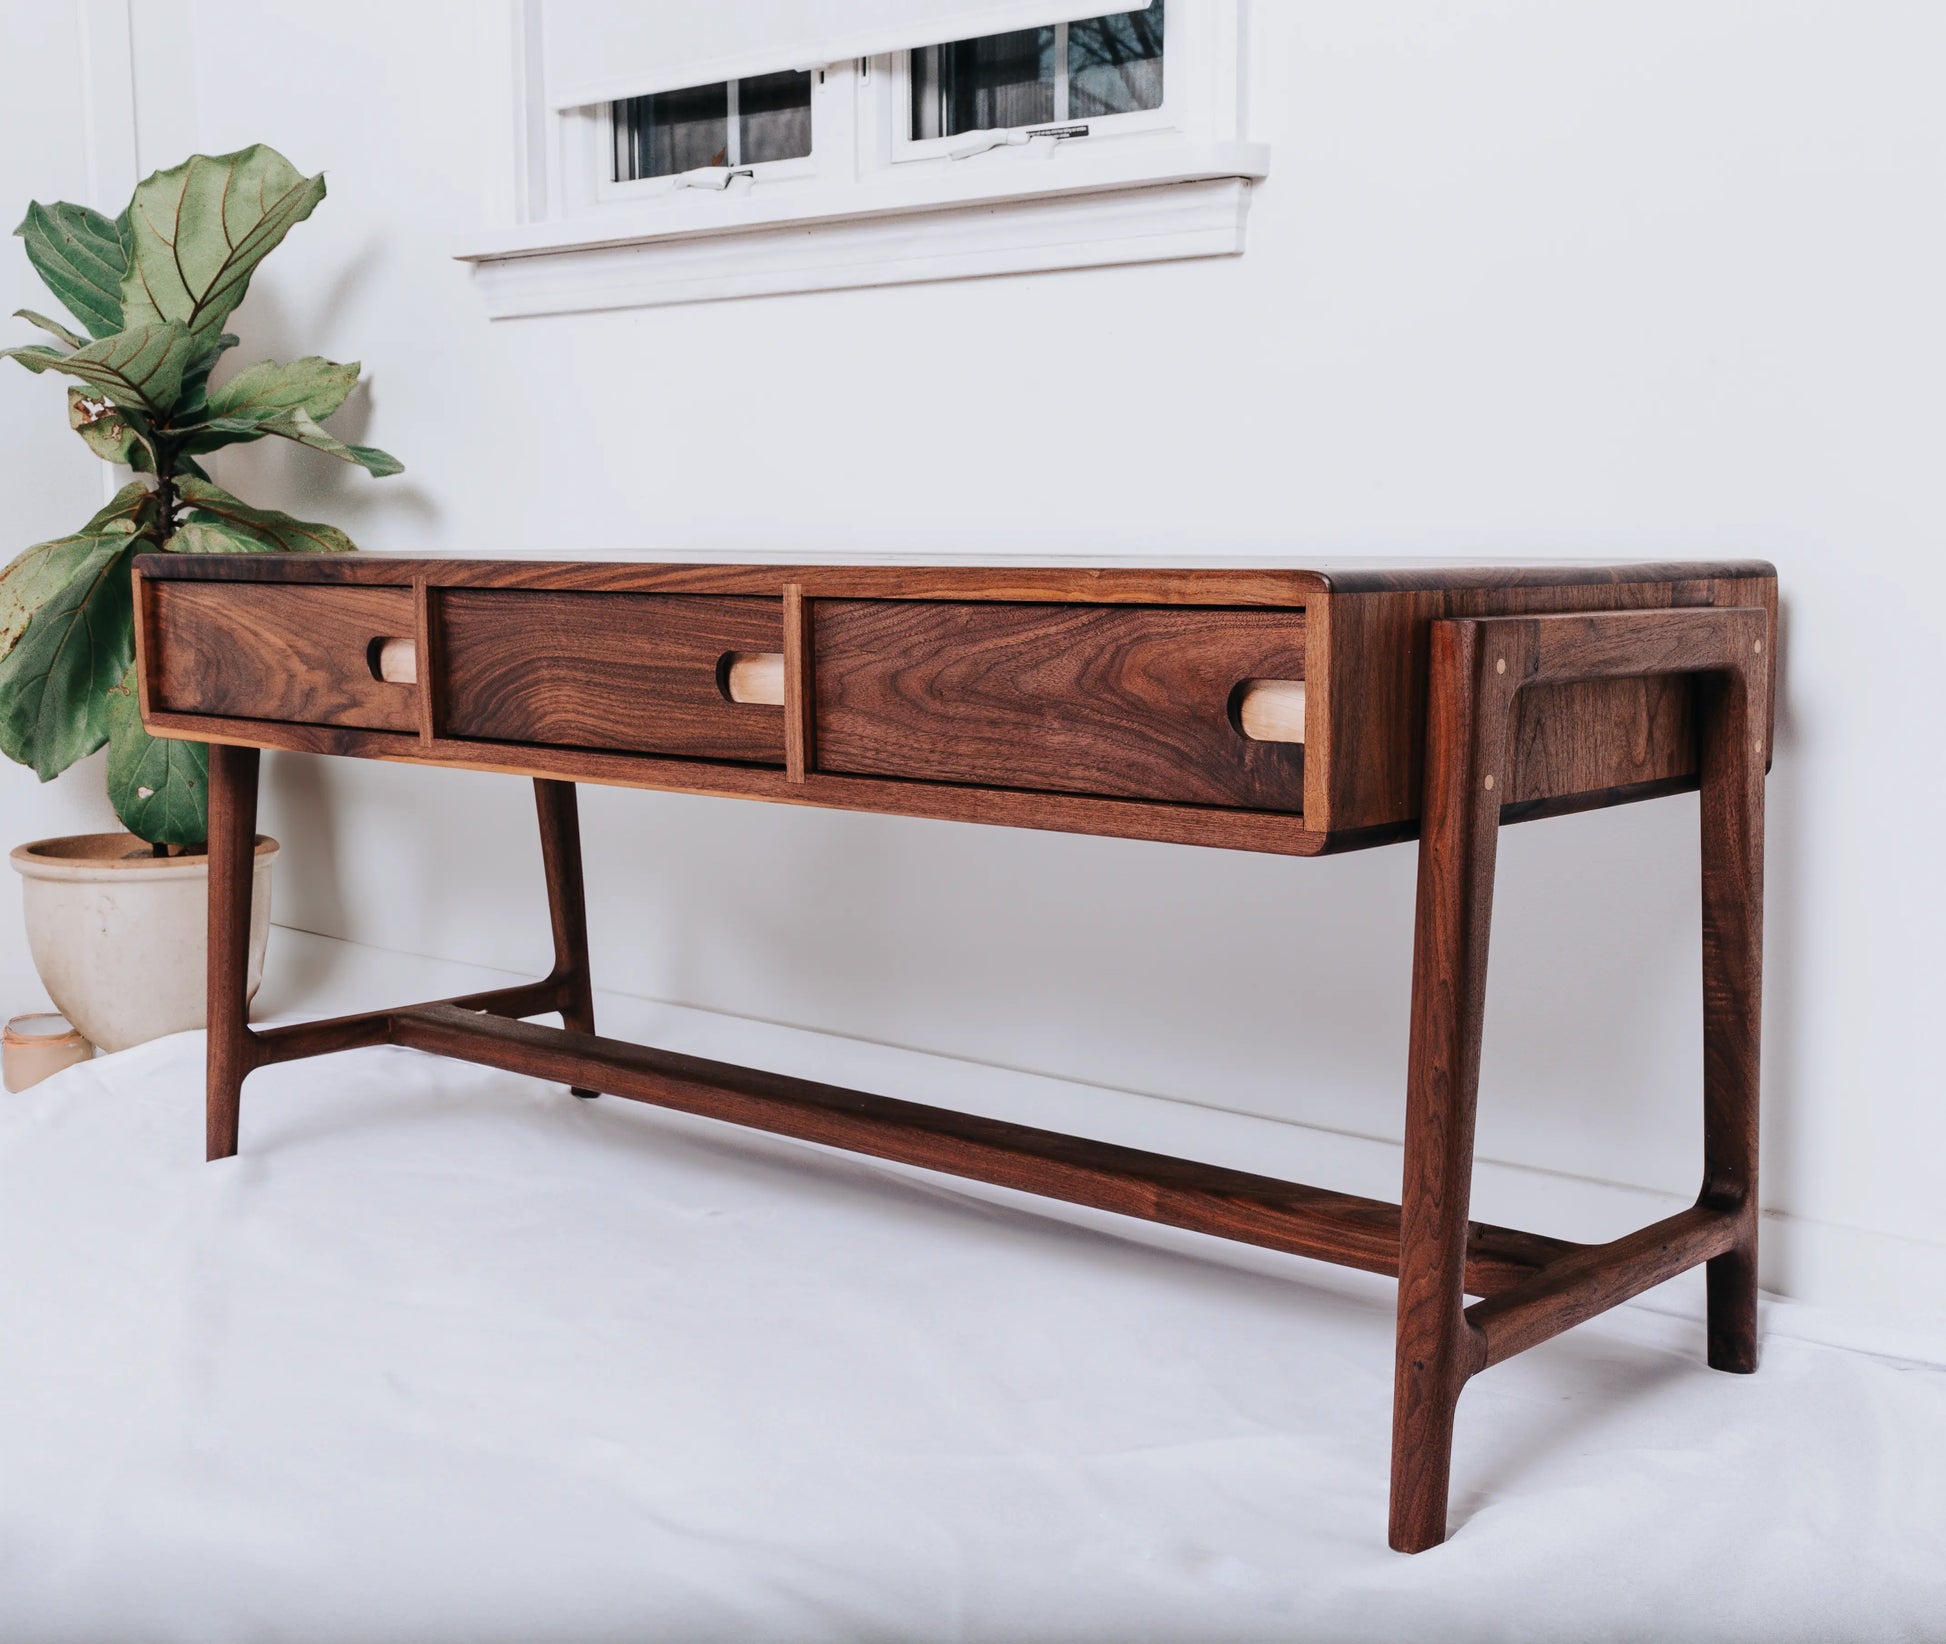 Elegant black walnut coffee table with rock maple accents and soft-close drawers in a Scandinavian design